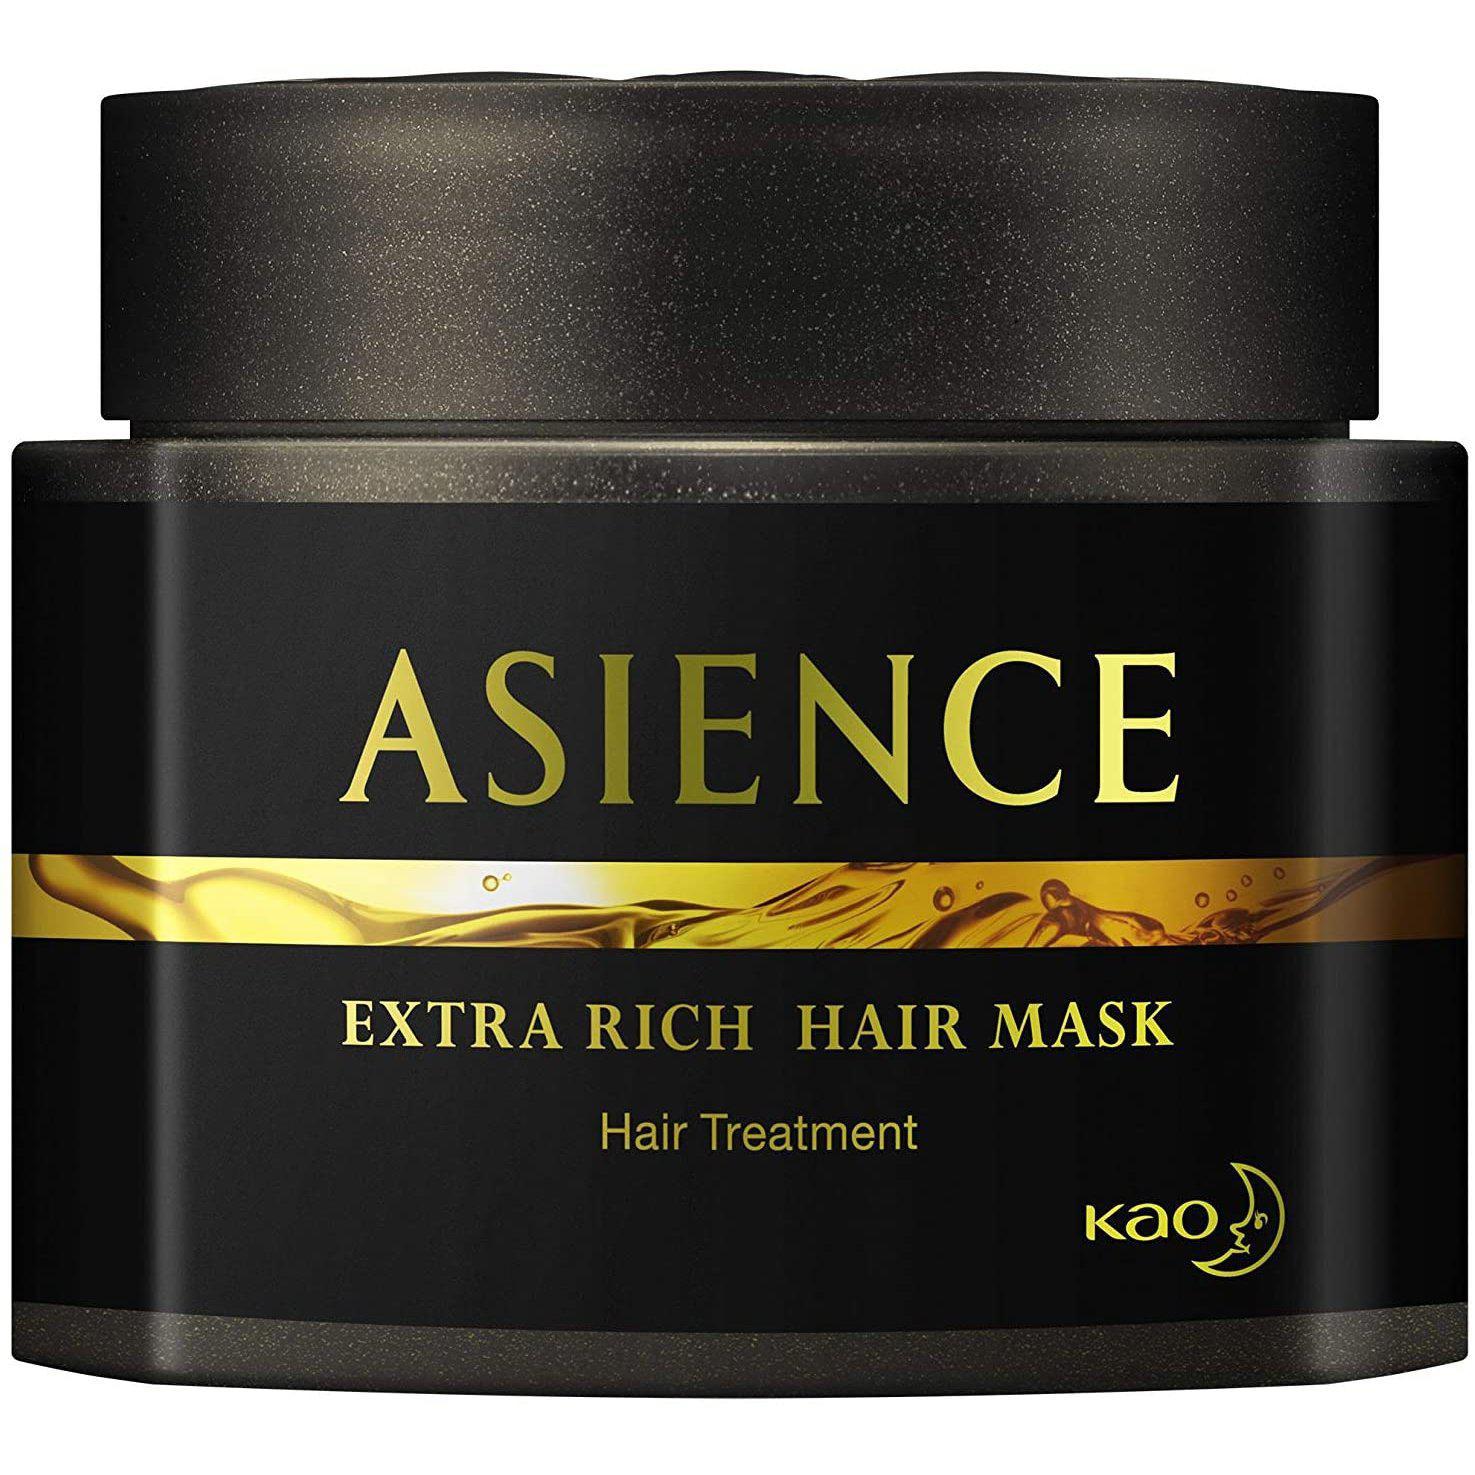 Asience Extra Rich 180g Hair Mask Treatment by Kao